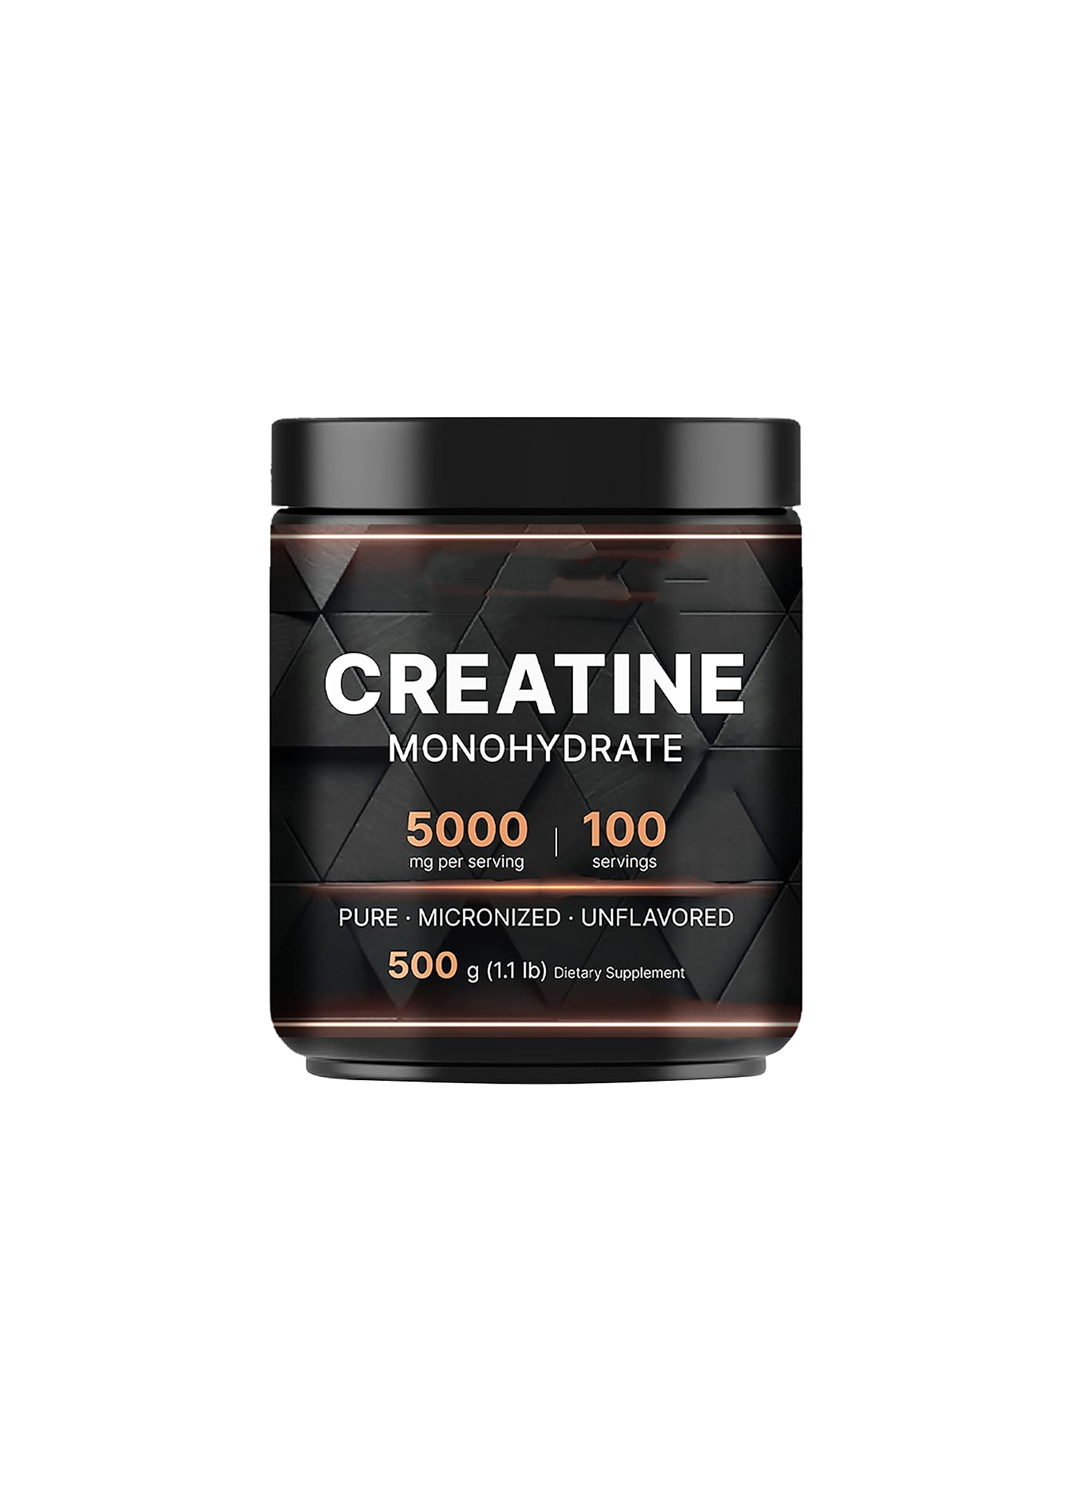 OEM Private Label Creatine Monohydrate powder Pure 100% creatine for muscle Builder&Recovery Micronized Preworkout powder